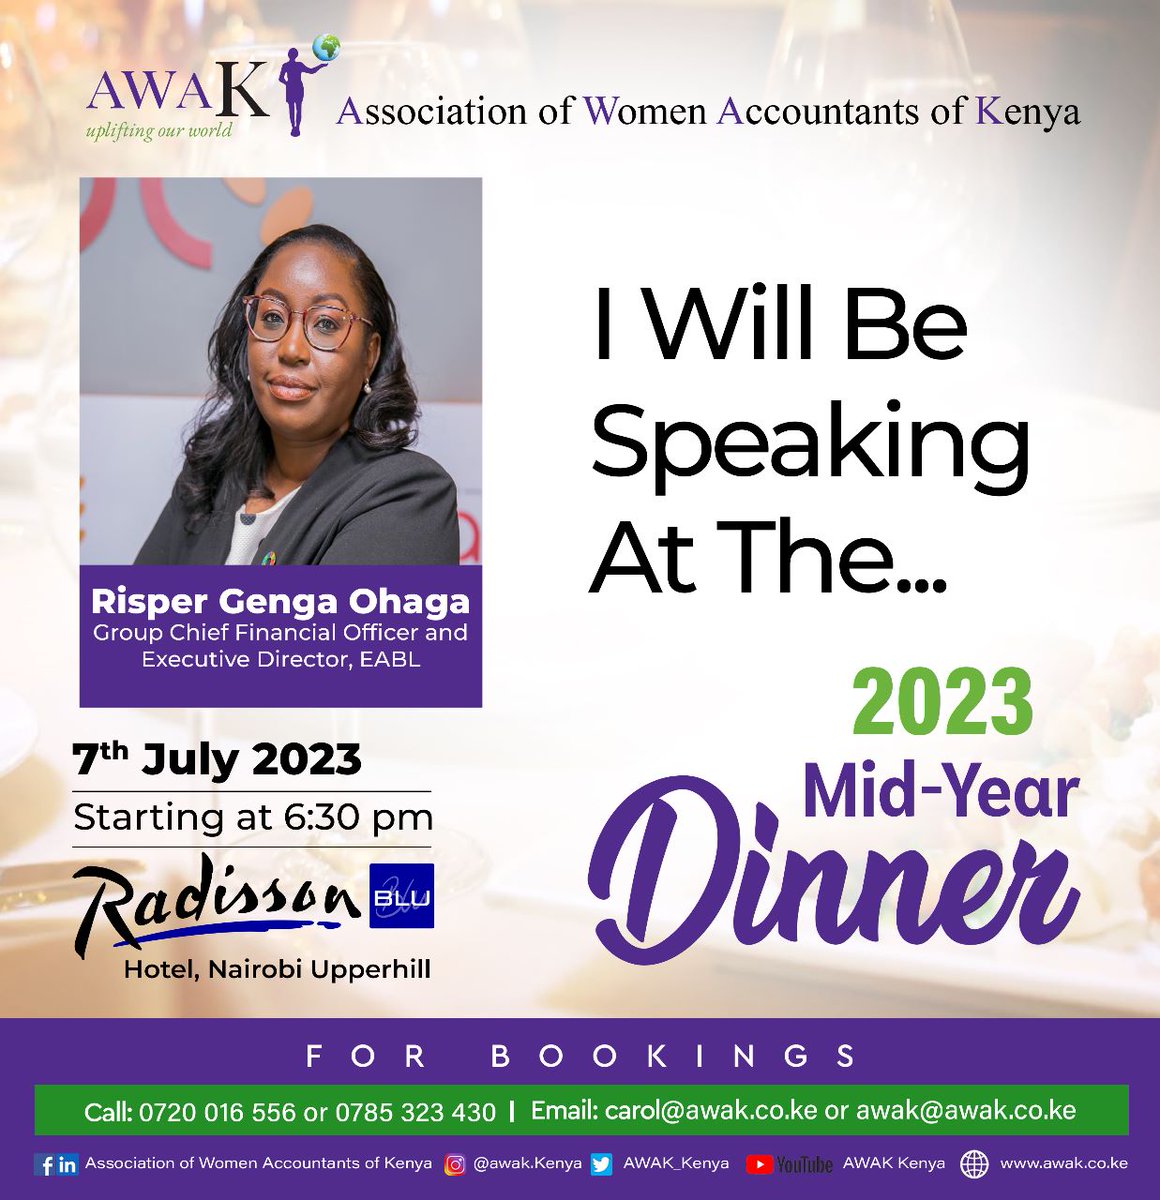 We are greatly honoured to have Risper Genga Ohaga
Group Chief Financial Officer & Executive Director, EABL- Plc speak to us on Strategic Professional Positioning at our 2023 Mid-Year Dinner.

Register today.
awak.co.ke/midyeardinner

#awakupliftingourworld #LeadershipDevelopment